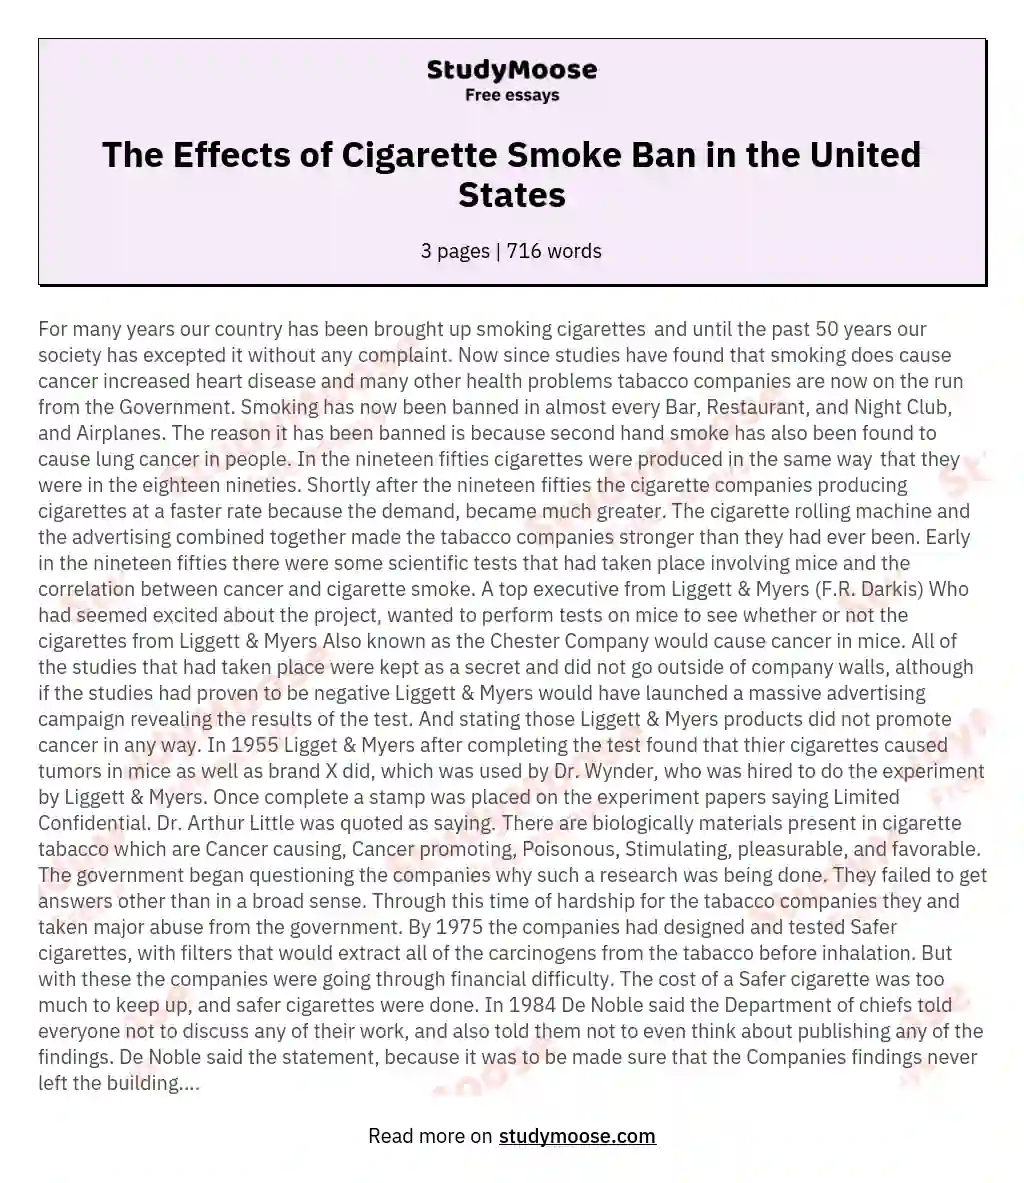 The Effects of Cigarette Smoke Ban in the United States essay